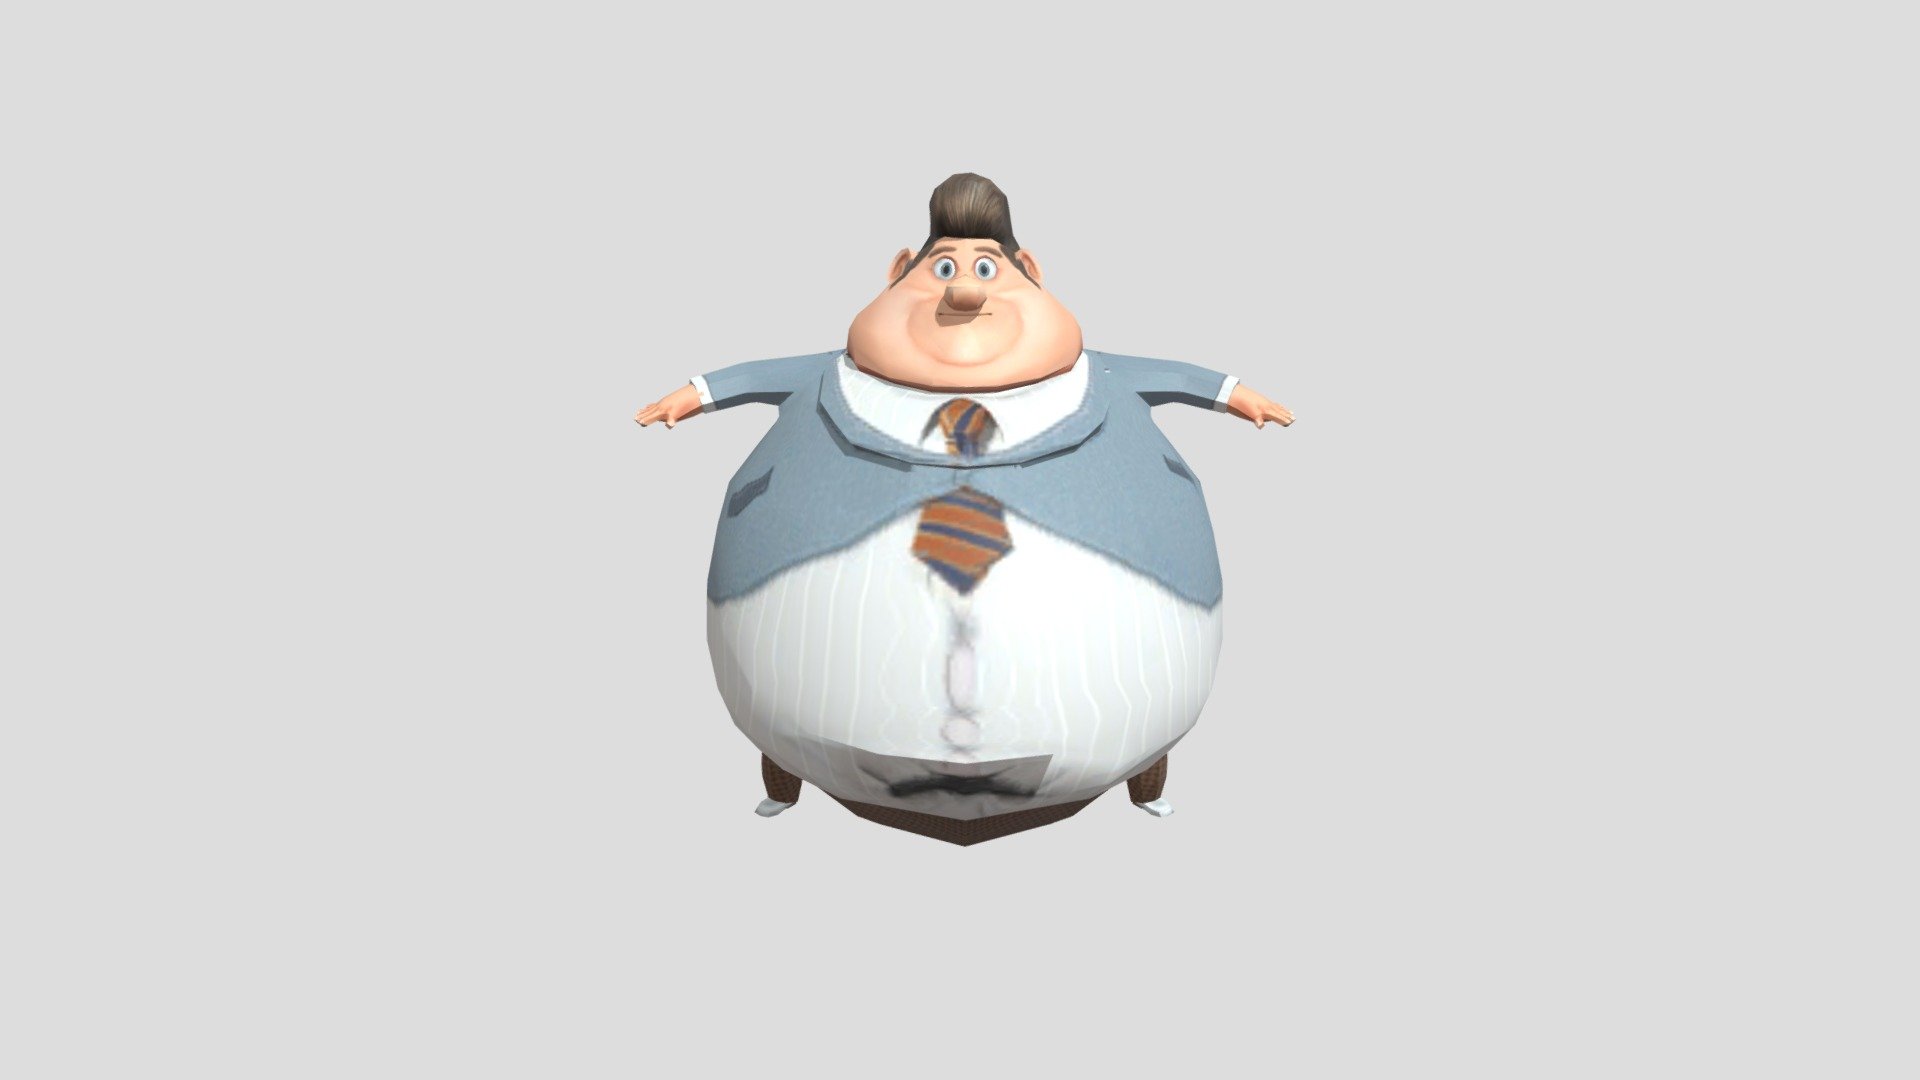 Caseoh Brainrot Mayor Shelbourne Cloudy With A Chance Of Meatballs 1920x1080